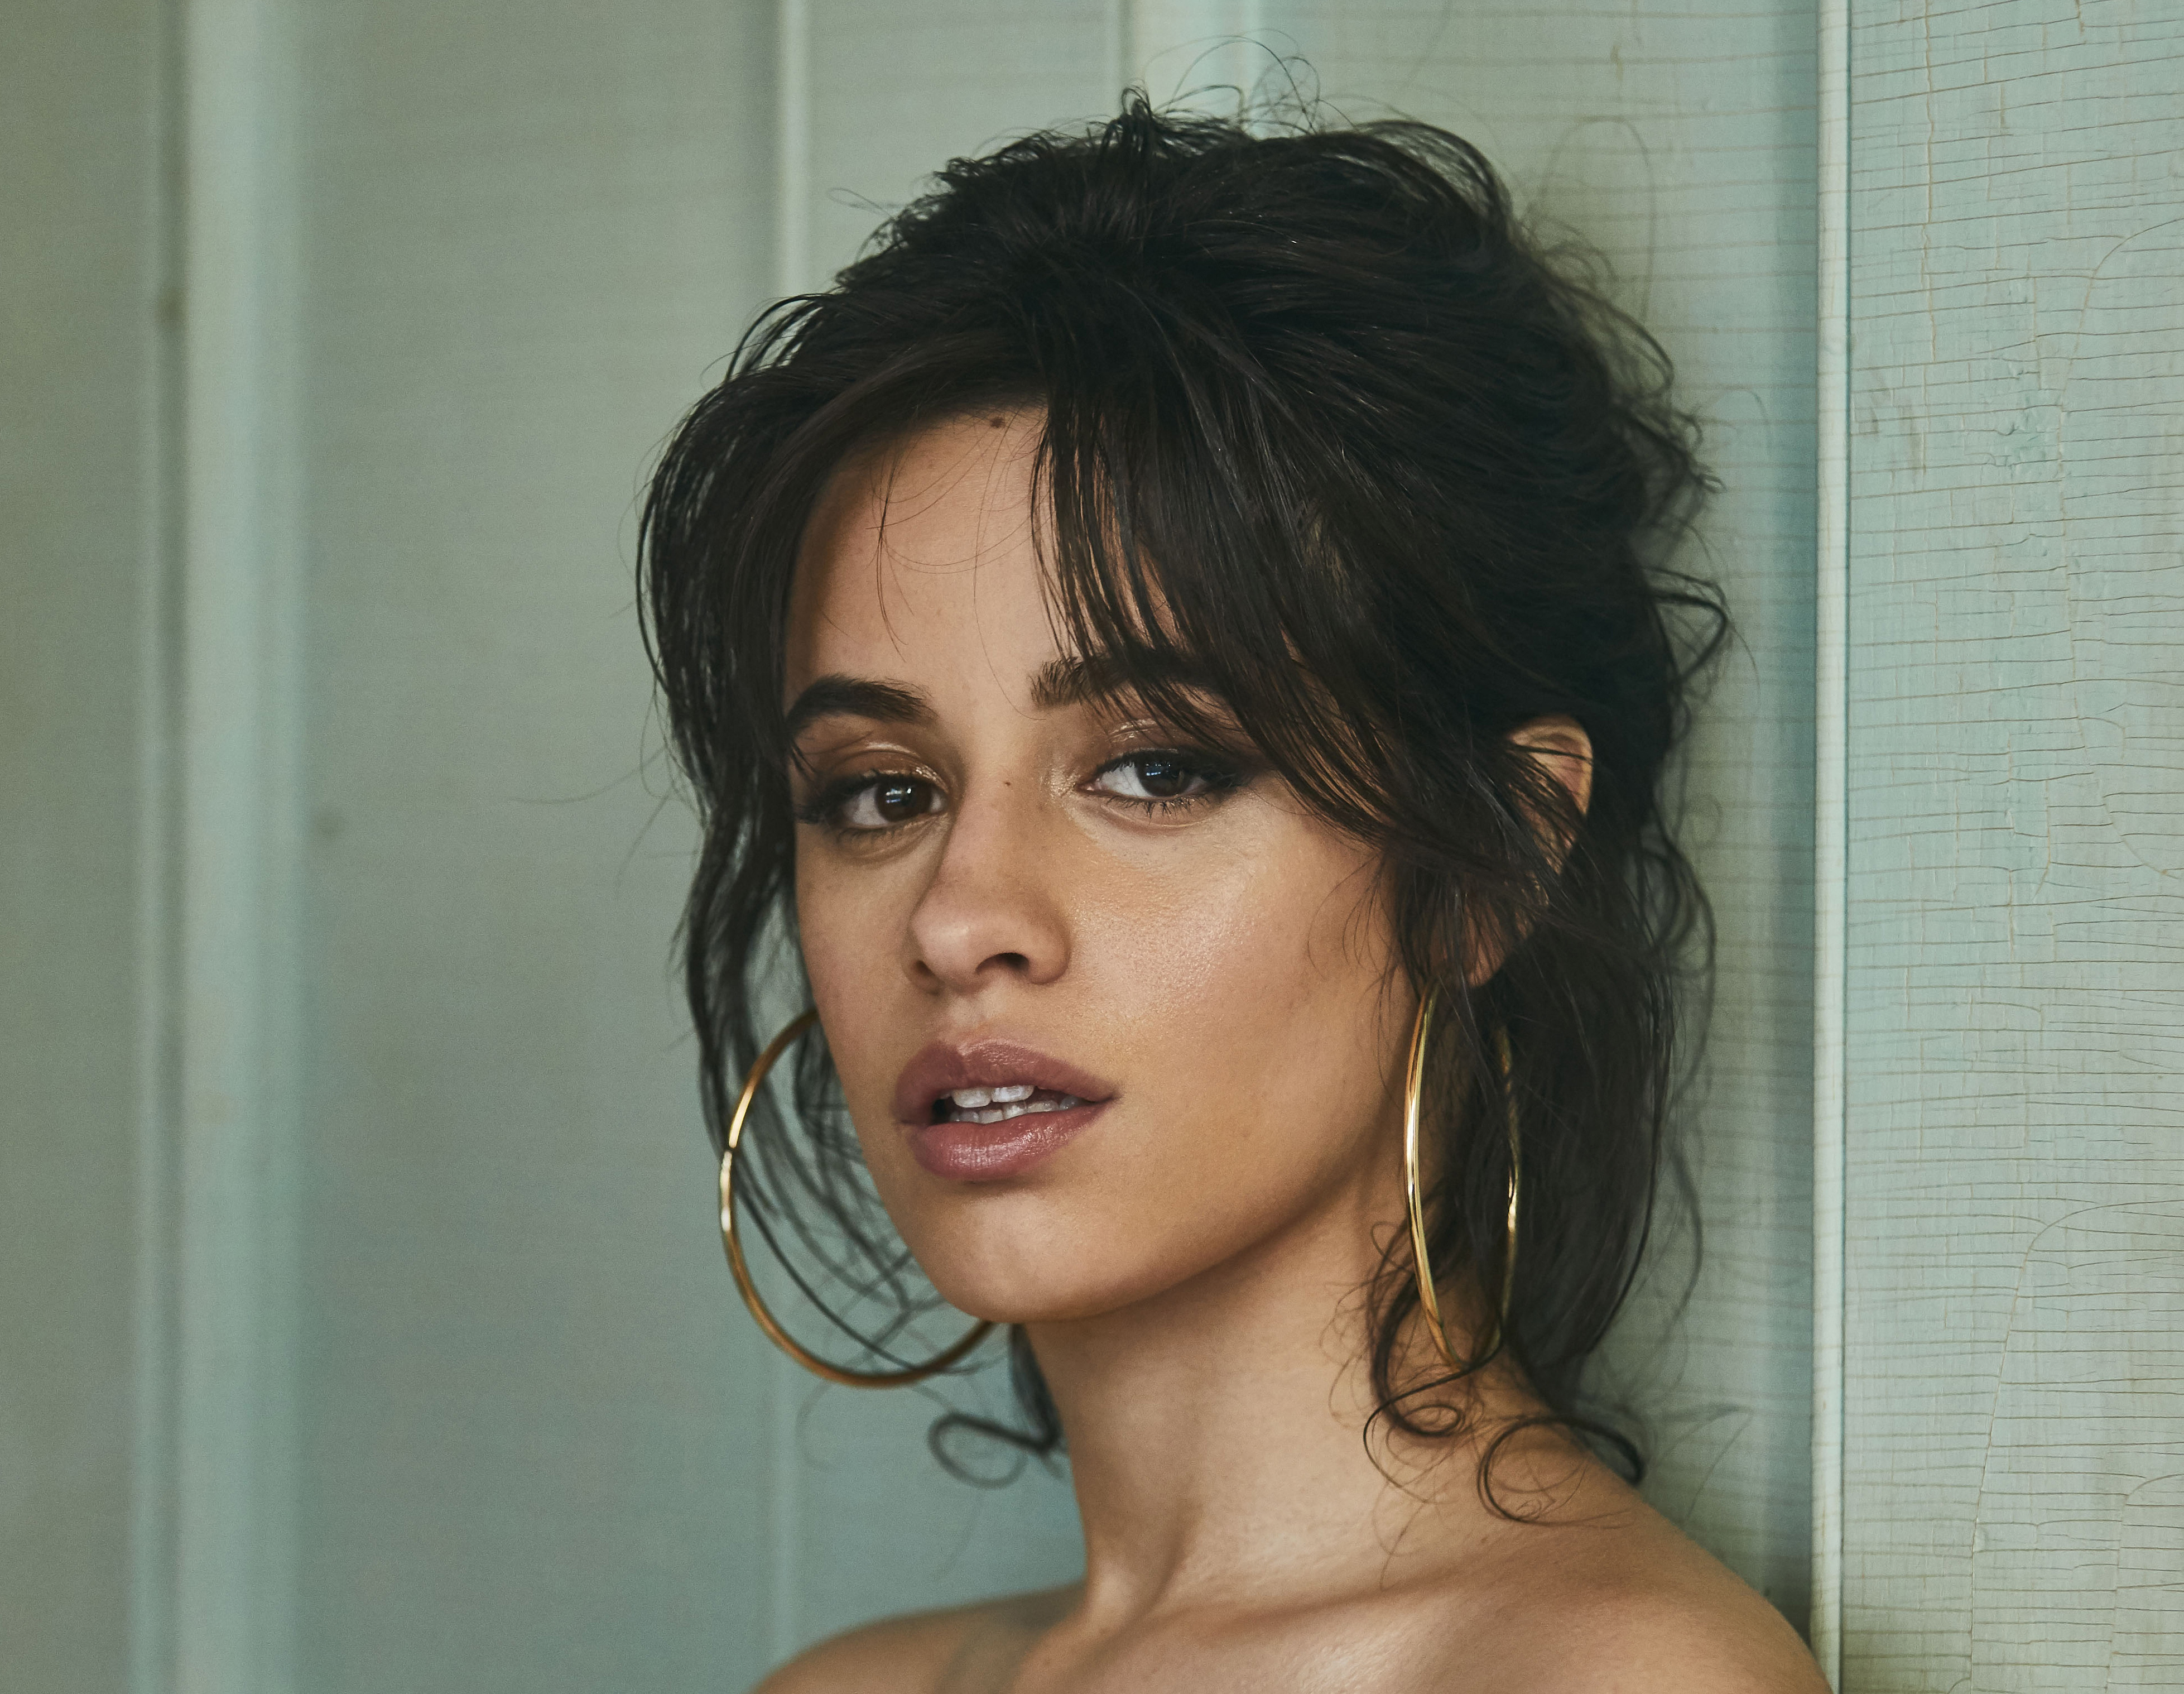 Camila Cabello Hd 4k 2018 Hd Music 4k Wallpapers Images Backgrounds Photos And Pictures